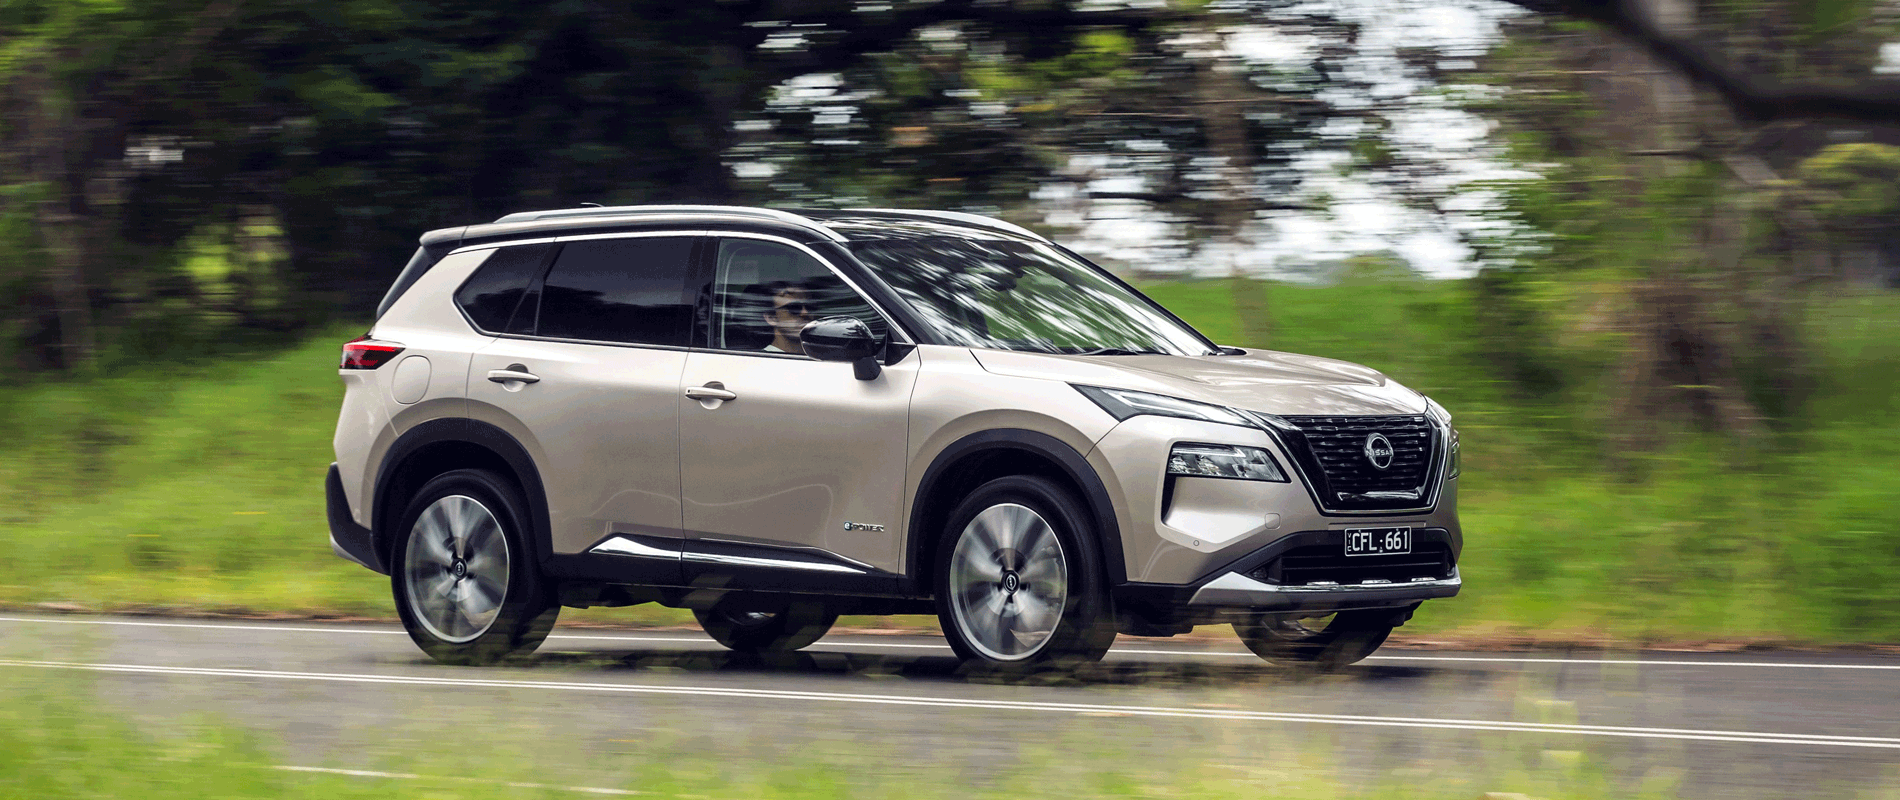 X-Trail’s electric innovation